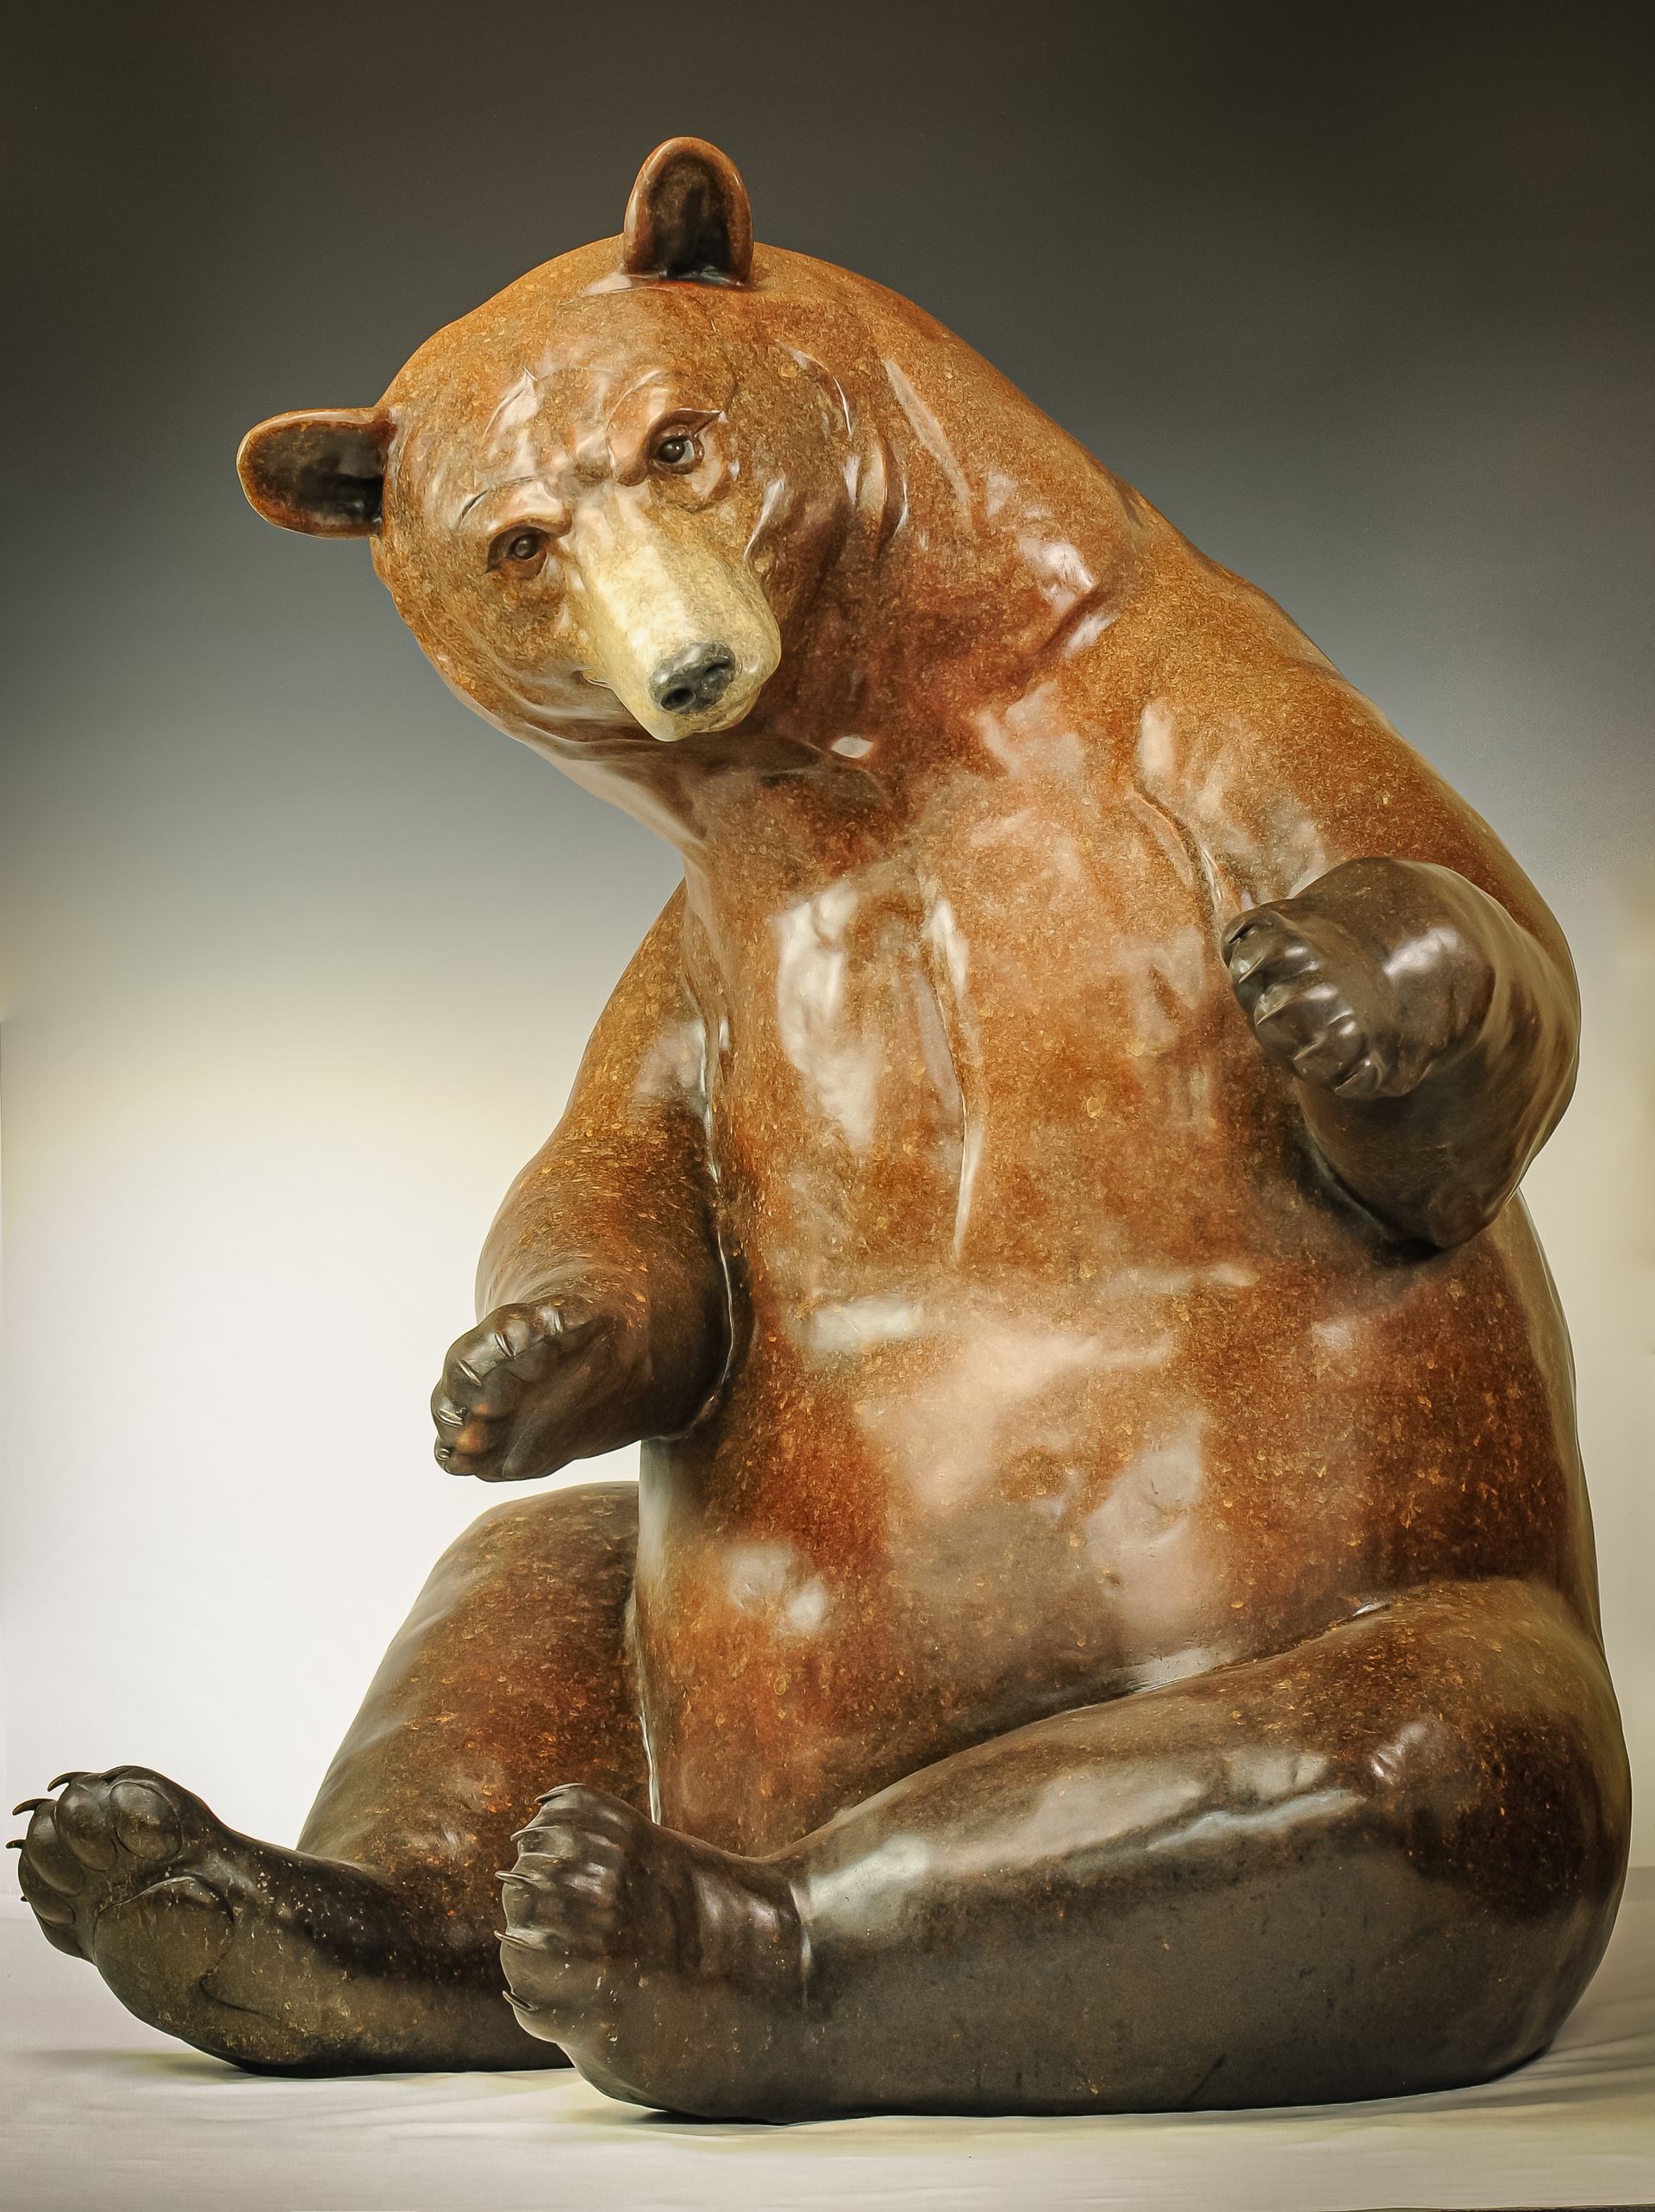 A Fine Art Sculpture In Bronze By Jeremy Bradshaw Featuring A Sitting Bear, Available At Gallery Wild